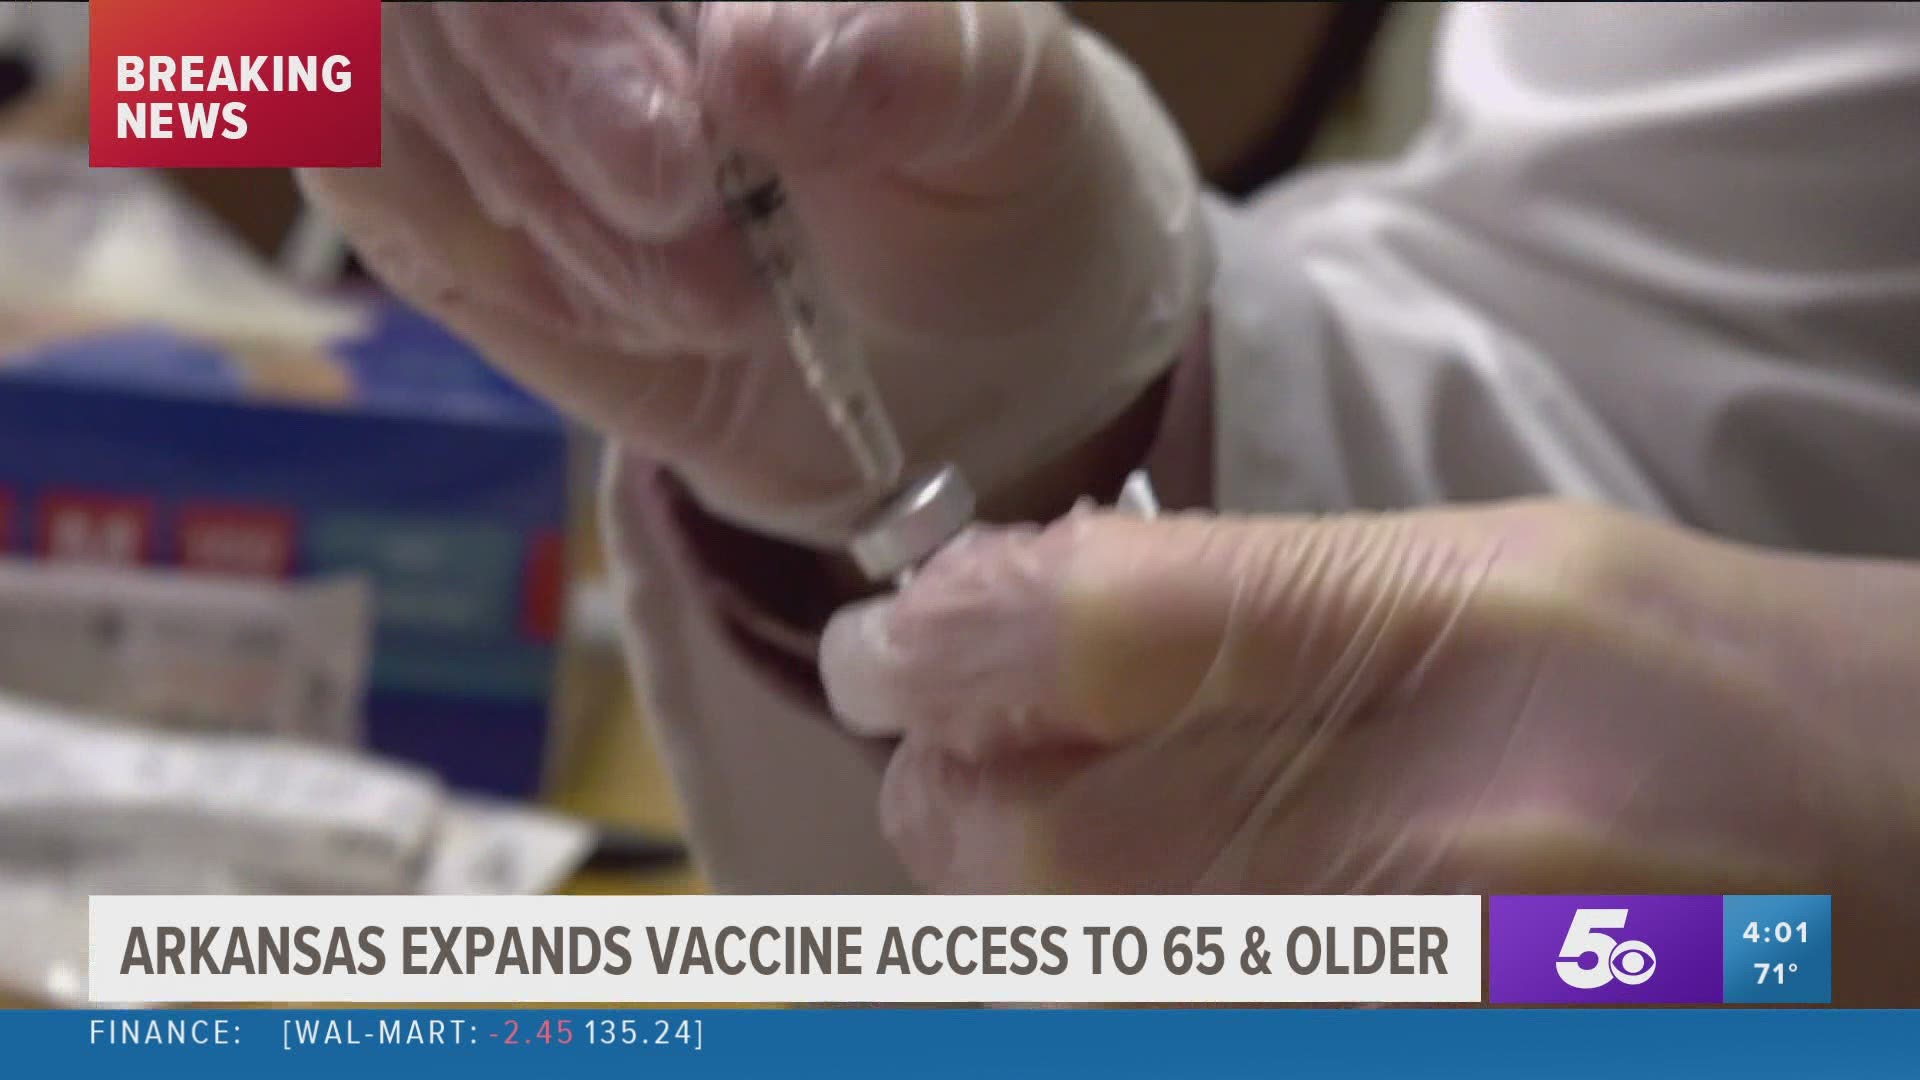 Arkansas expands COVID-19 vaccine access to those 65 and older